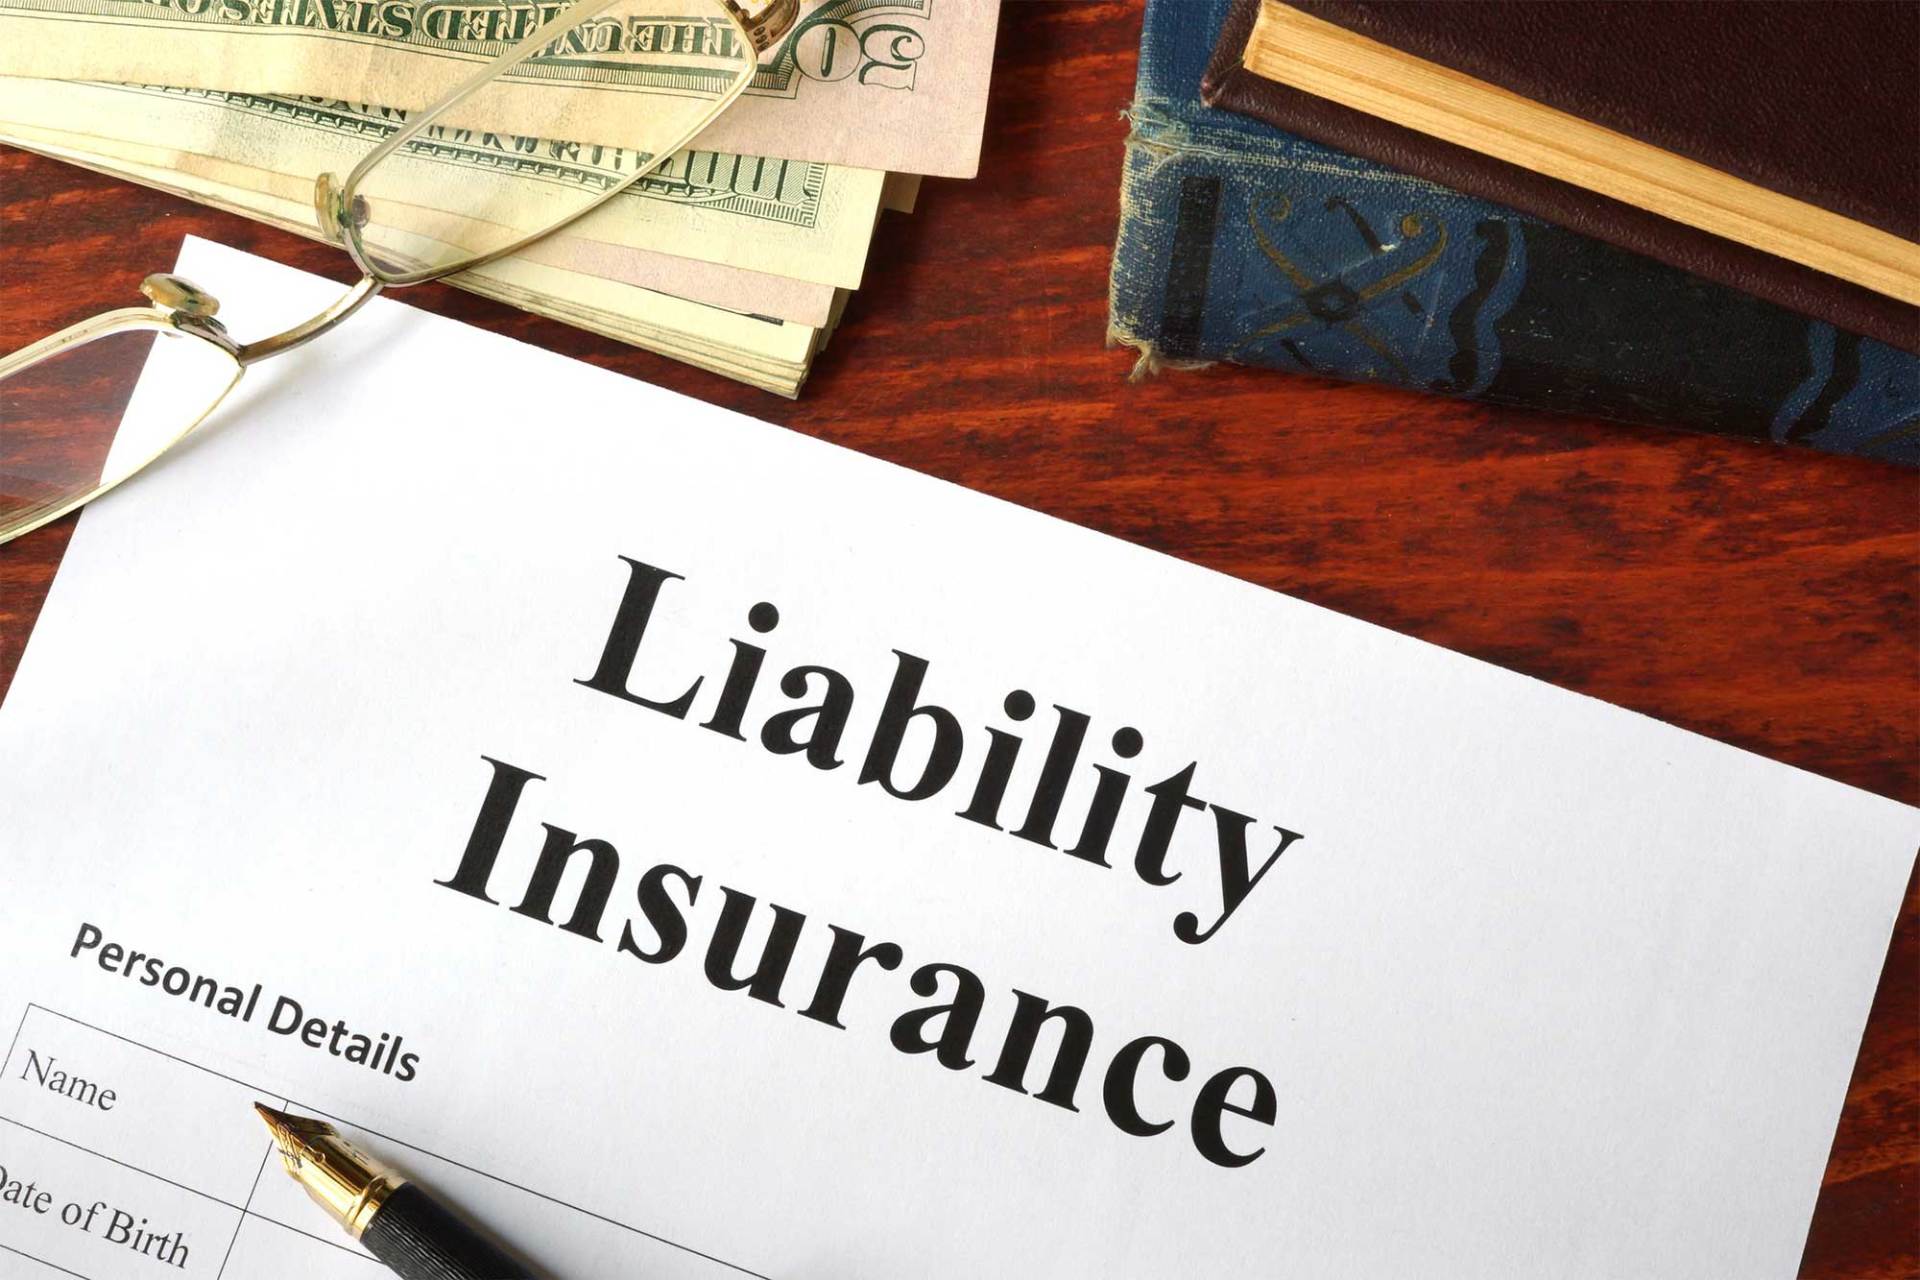 Items needed for business liability insurance near Grandview Heights, OH